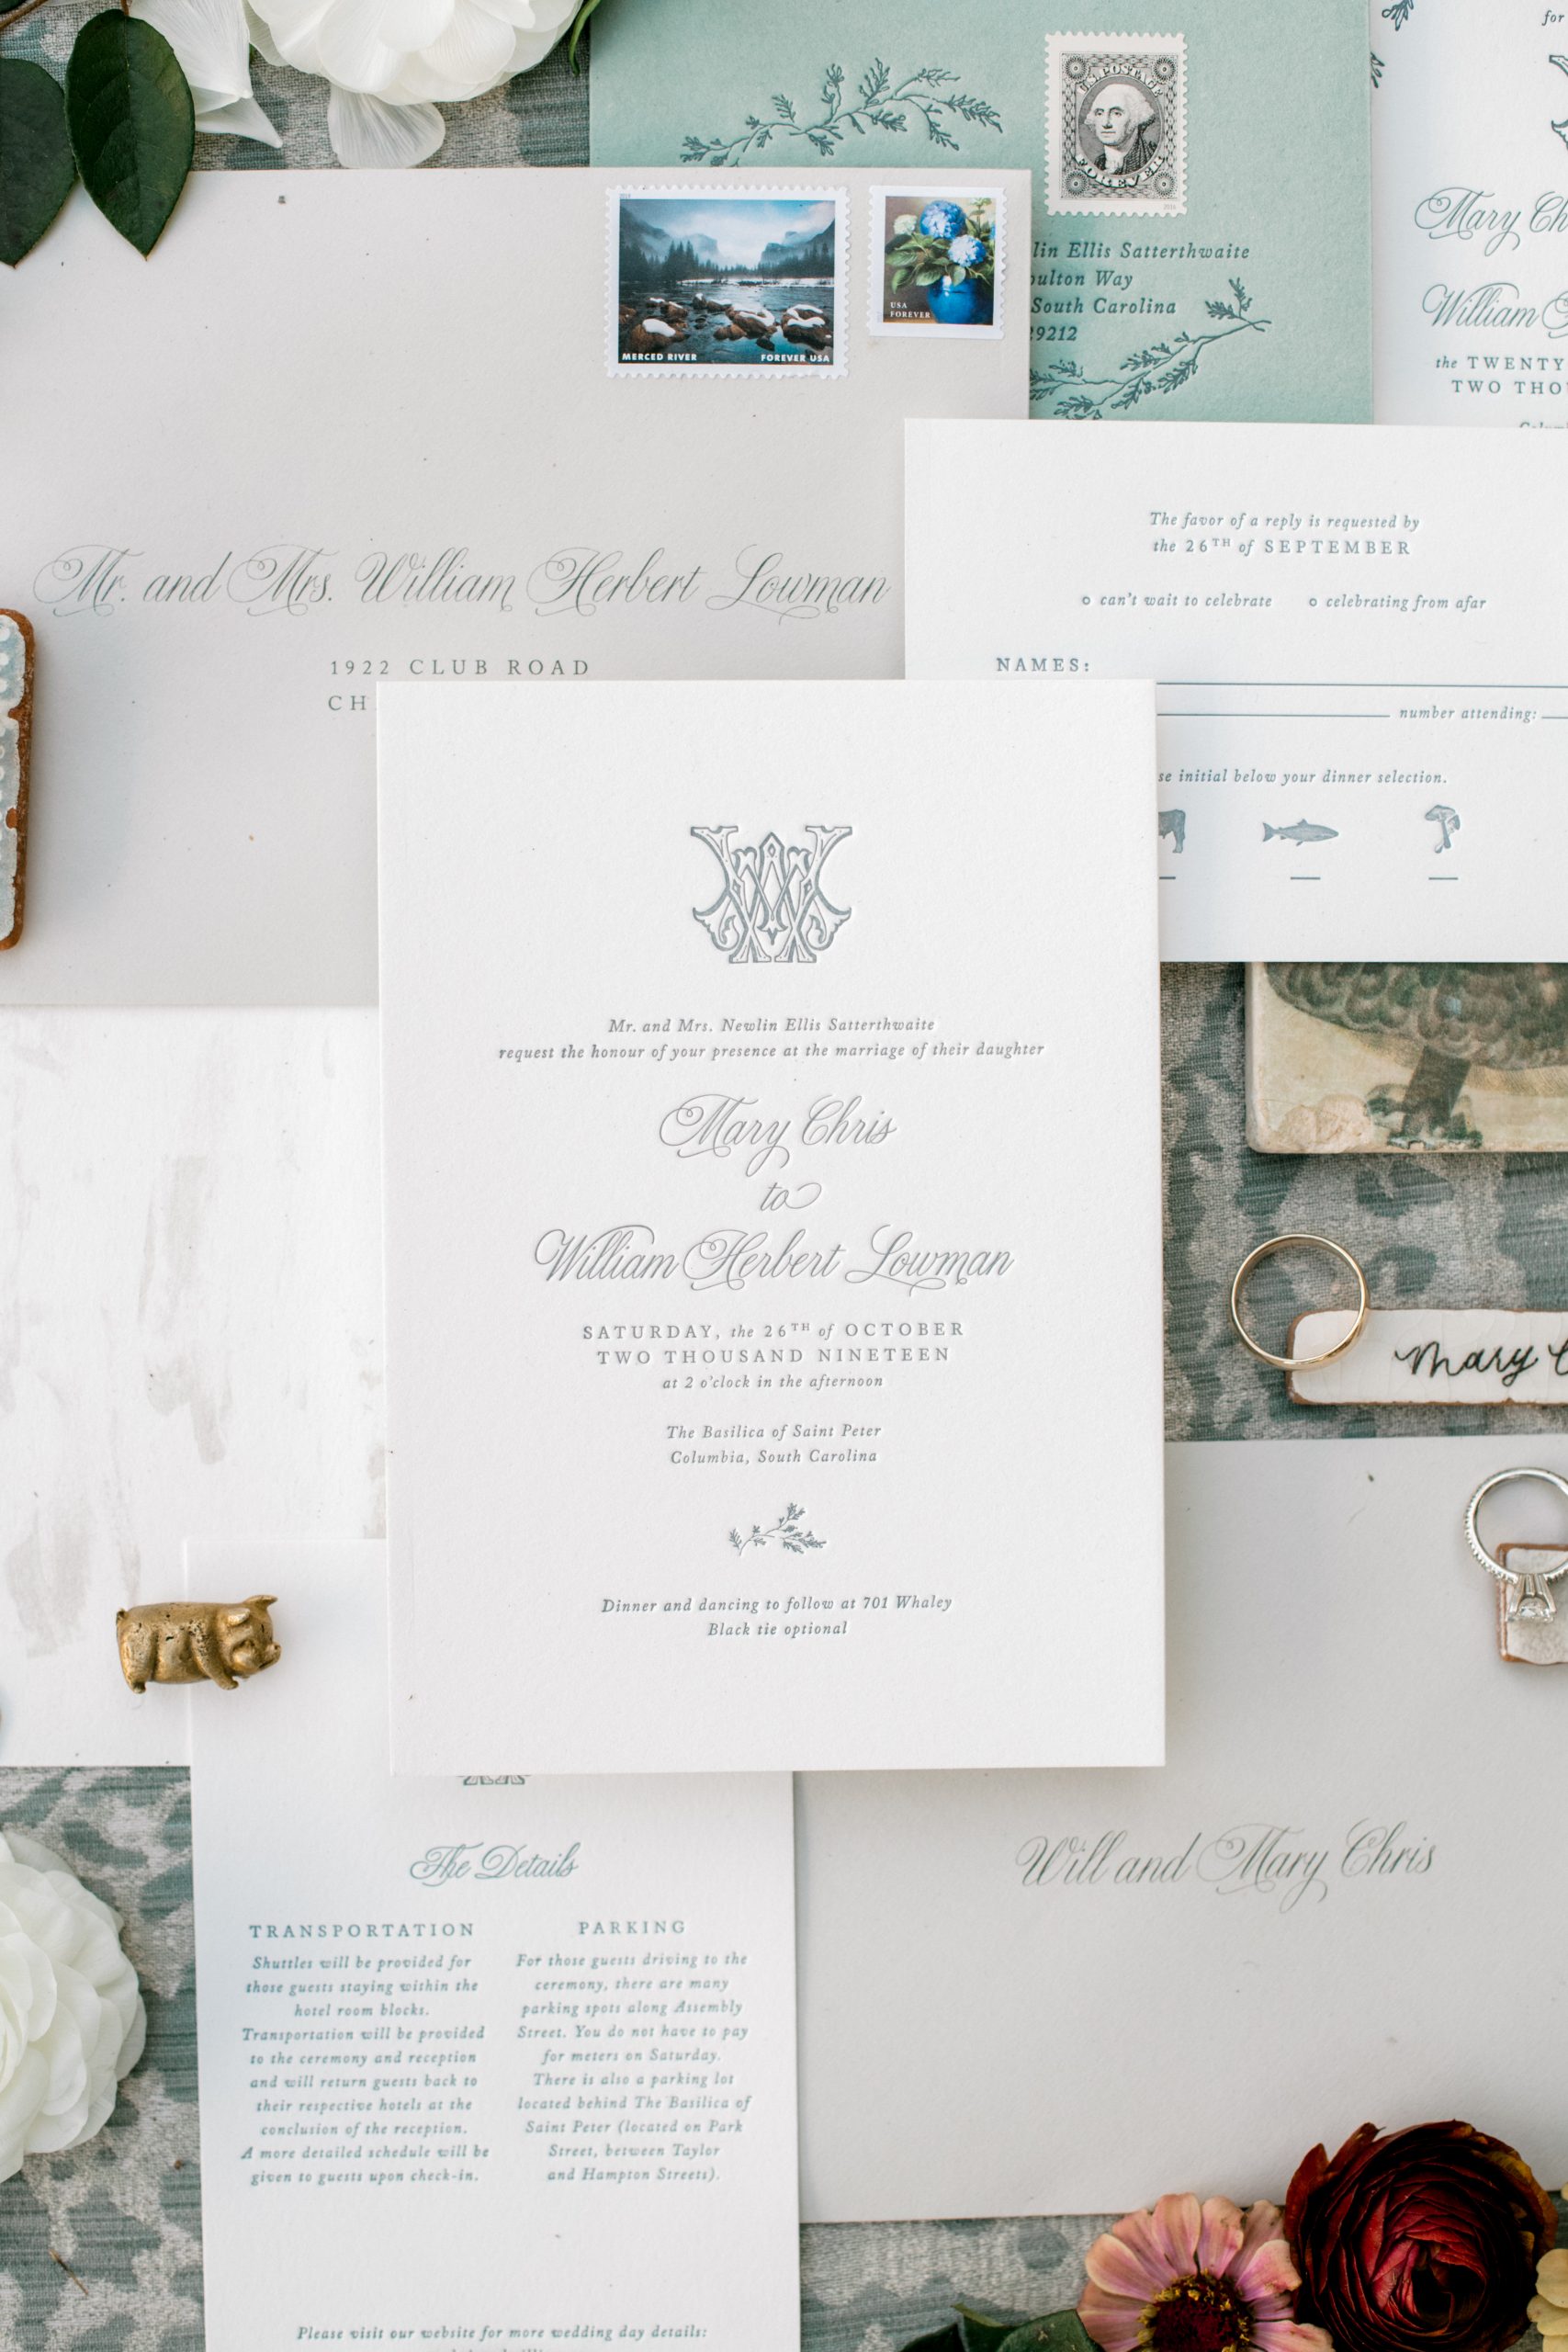 Wedding planner Meagan Warren teamed up with Shana Wanco of Iris & Marie Press for the couple’s invitations and other stationery.